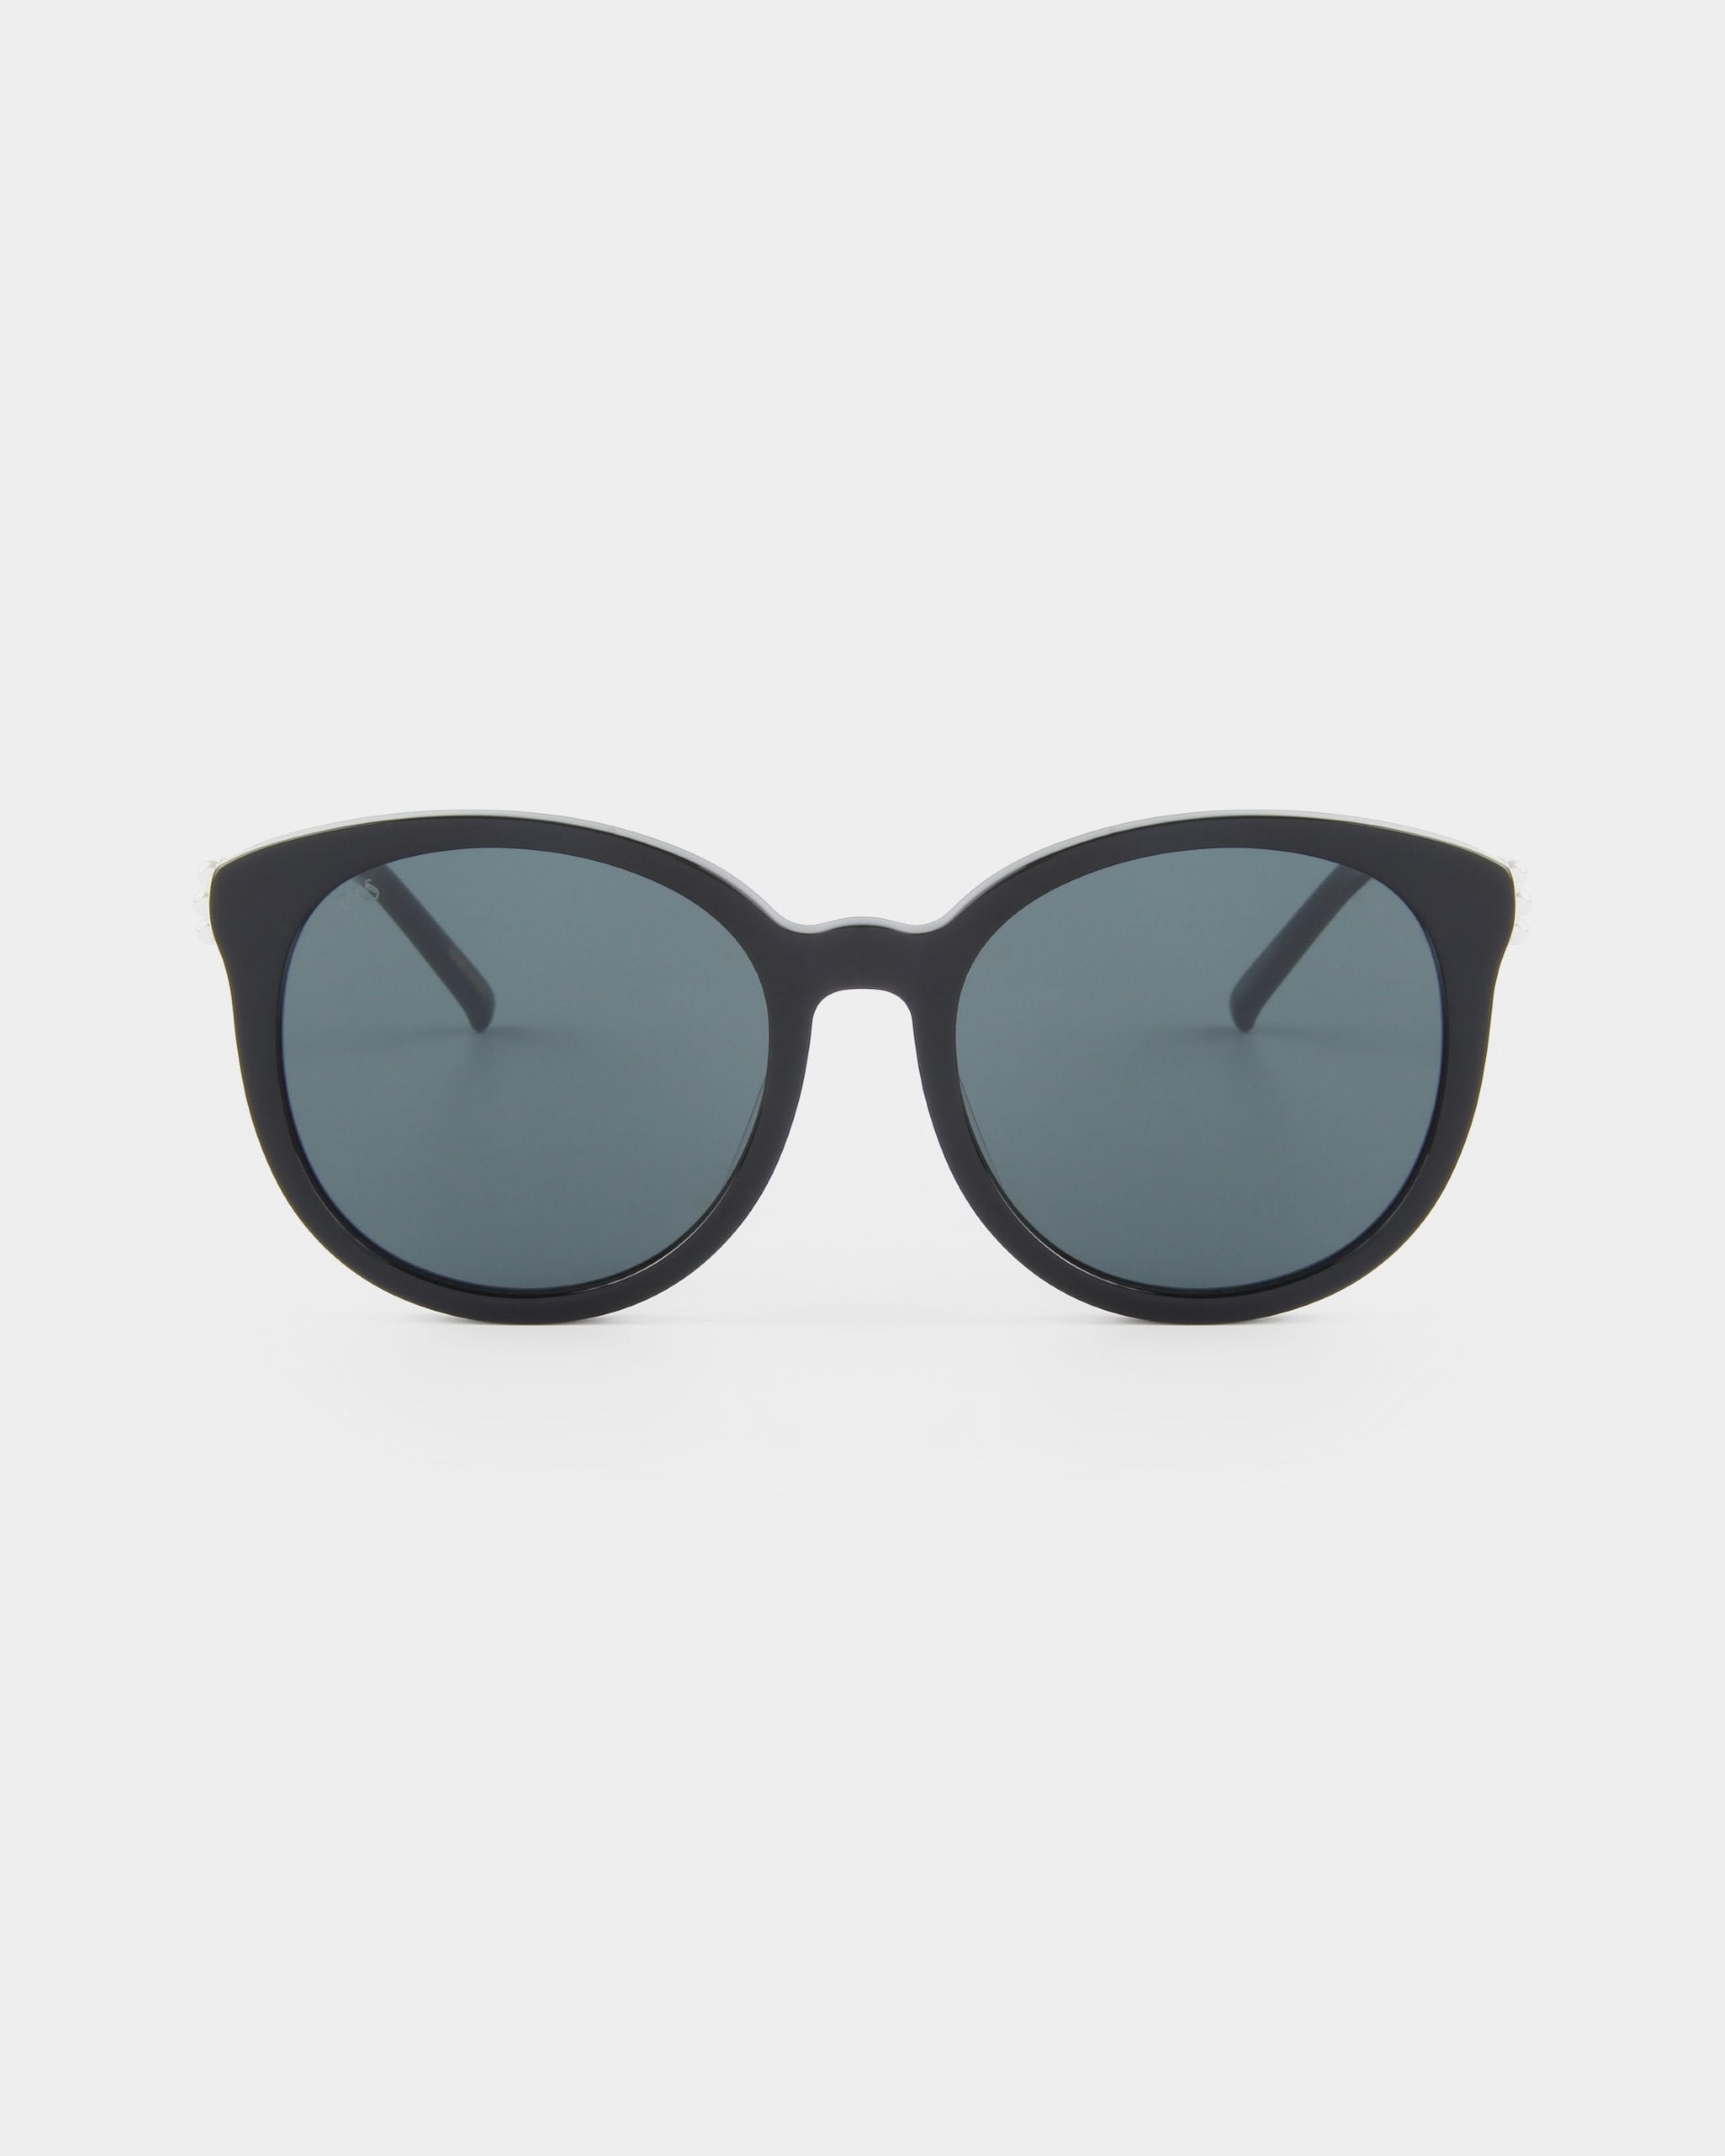 A pair of black Scarlett frames, round-frame sunglasses with shatter-resistant nylon lenses that offer UVA & UVB protection are viewed from the front against a plain white background. These are Scarlett by For Art's Sake®.